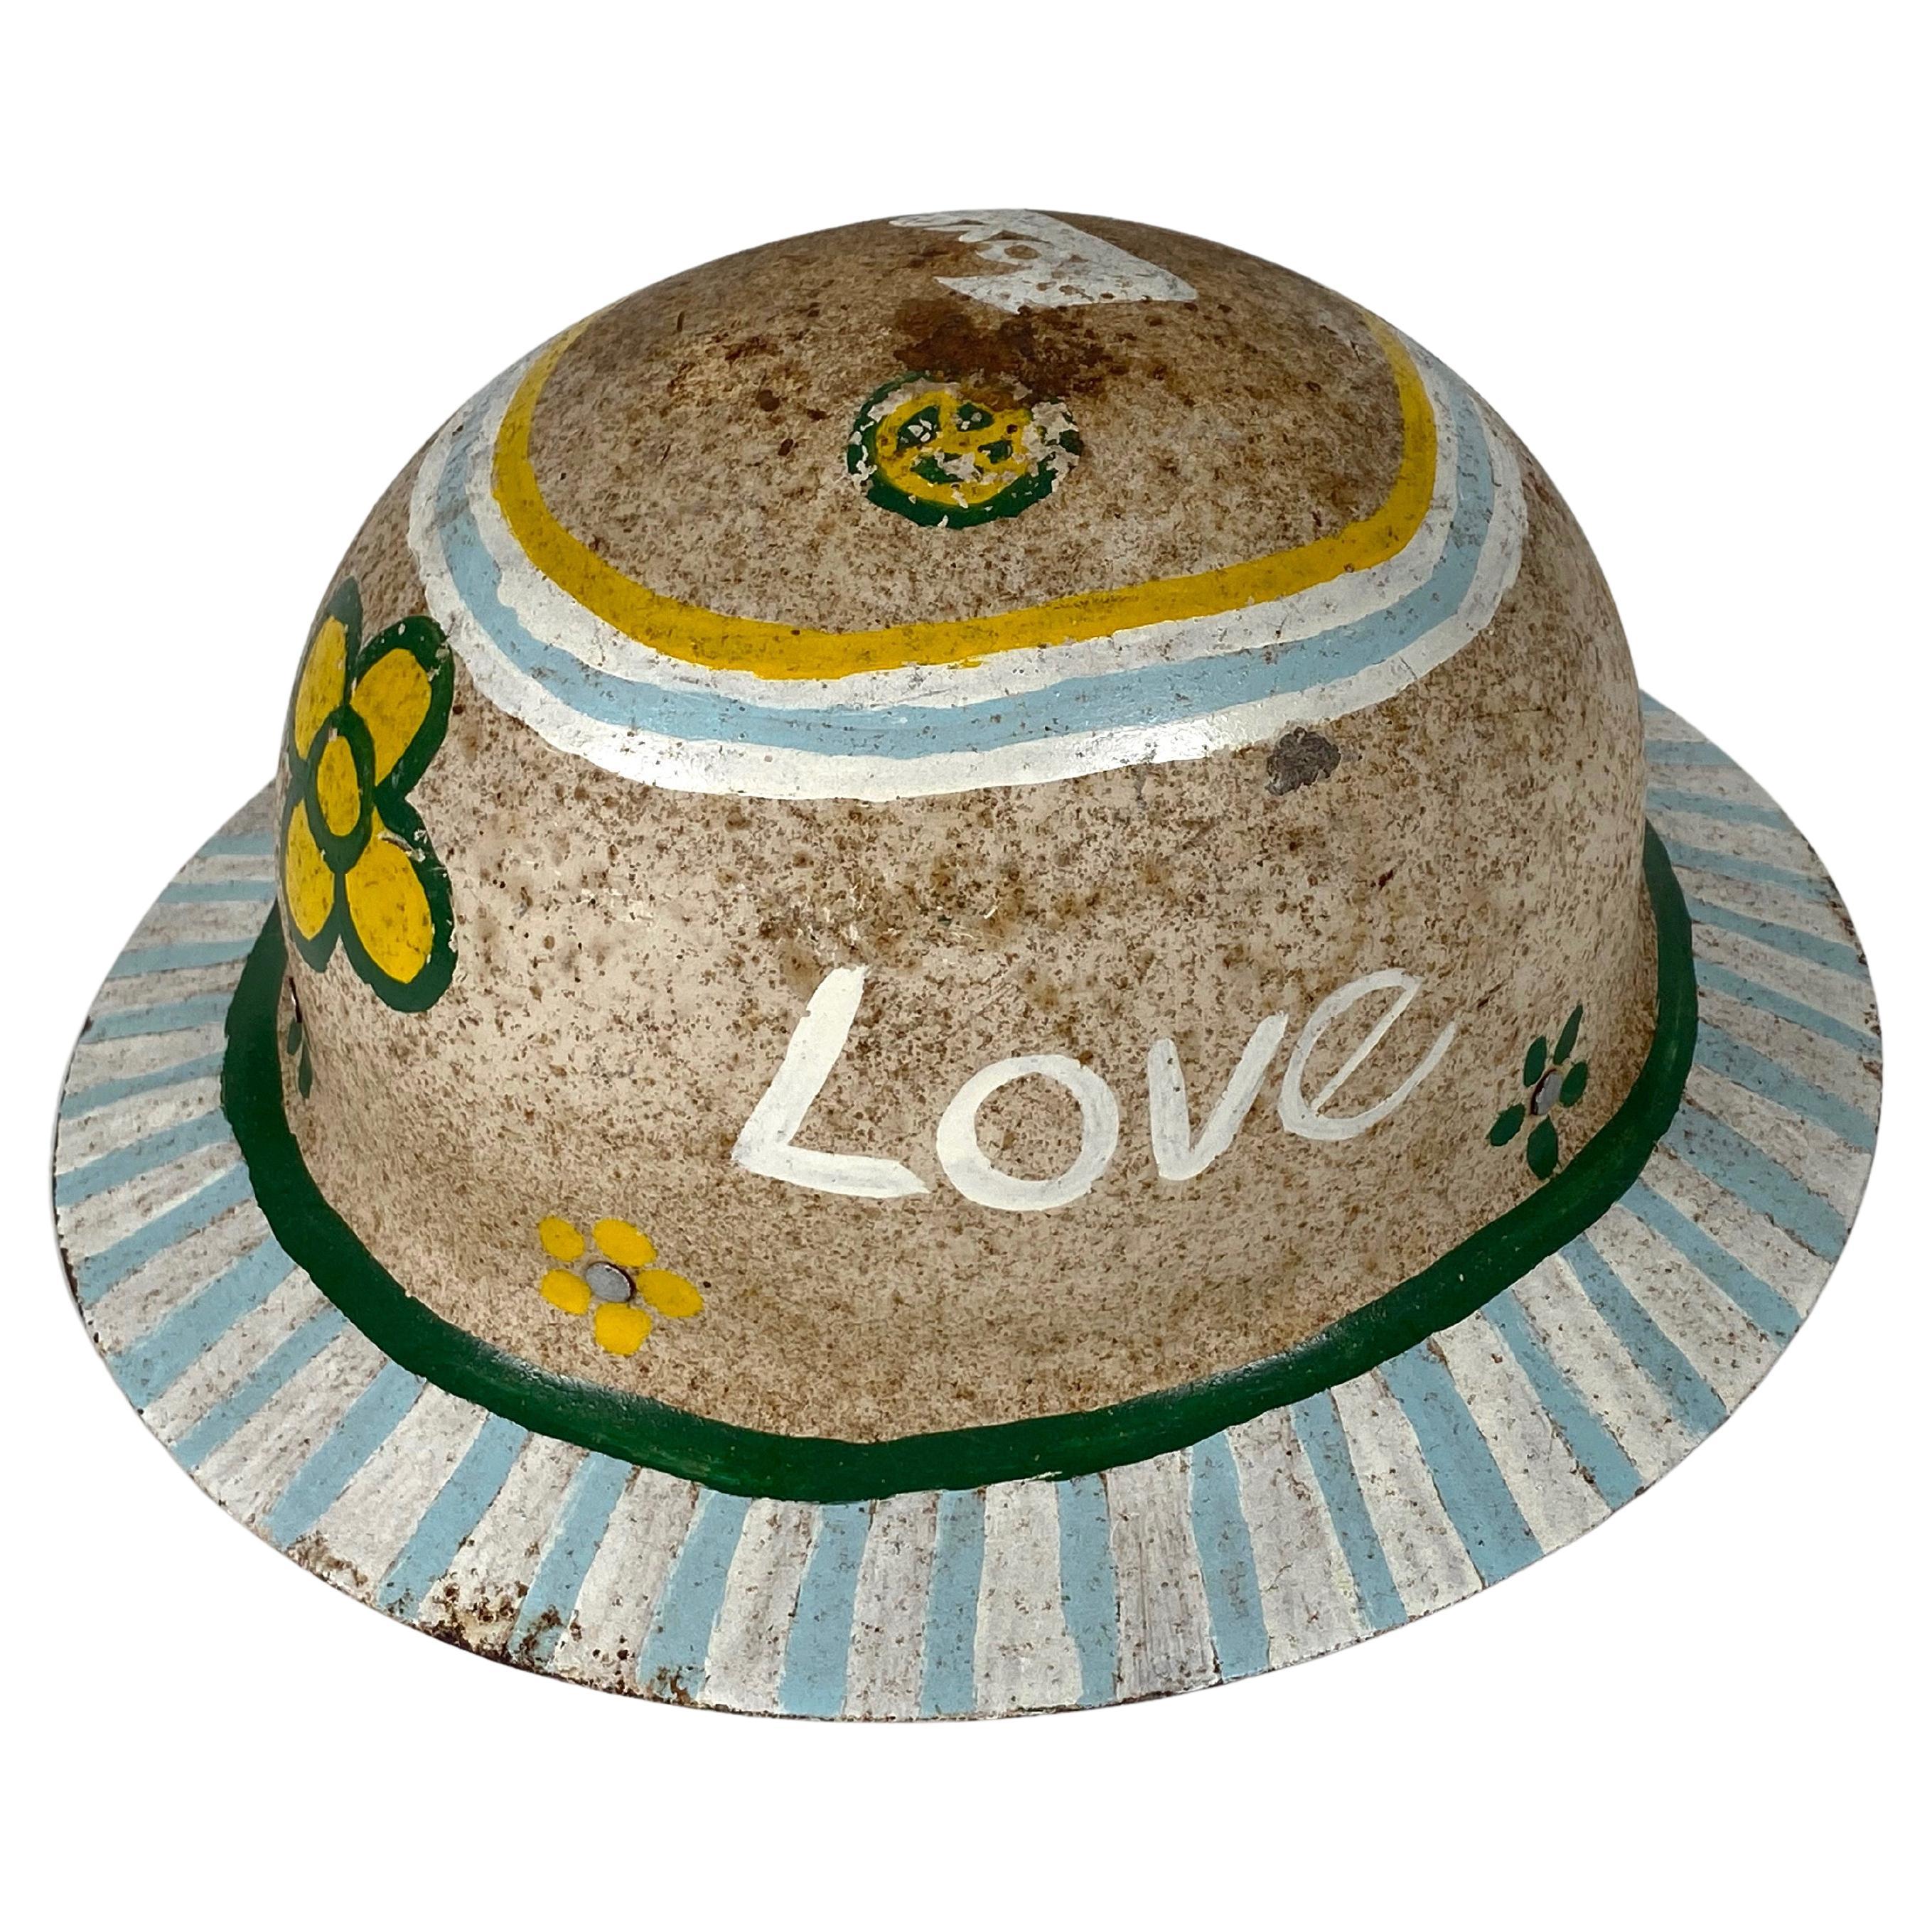 Original 1960s Hand Painted Hippie Hardhat  Bay Area Artifact For Sale